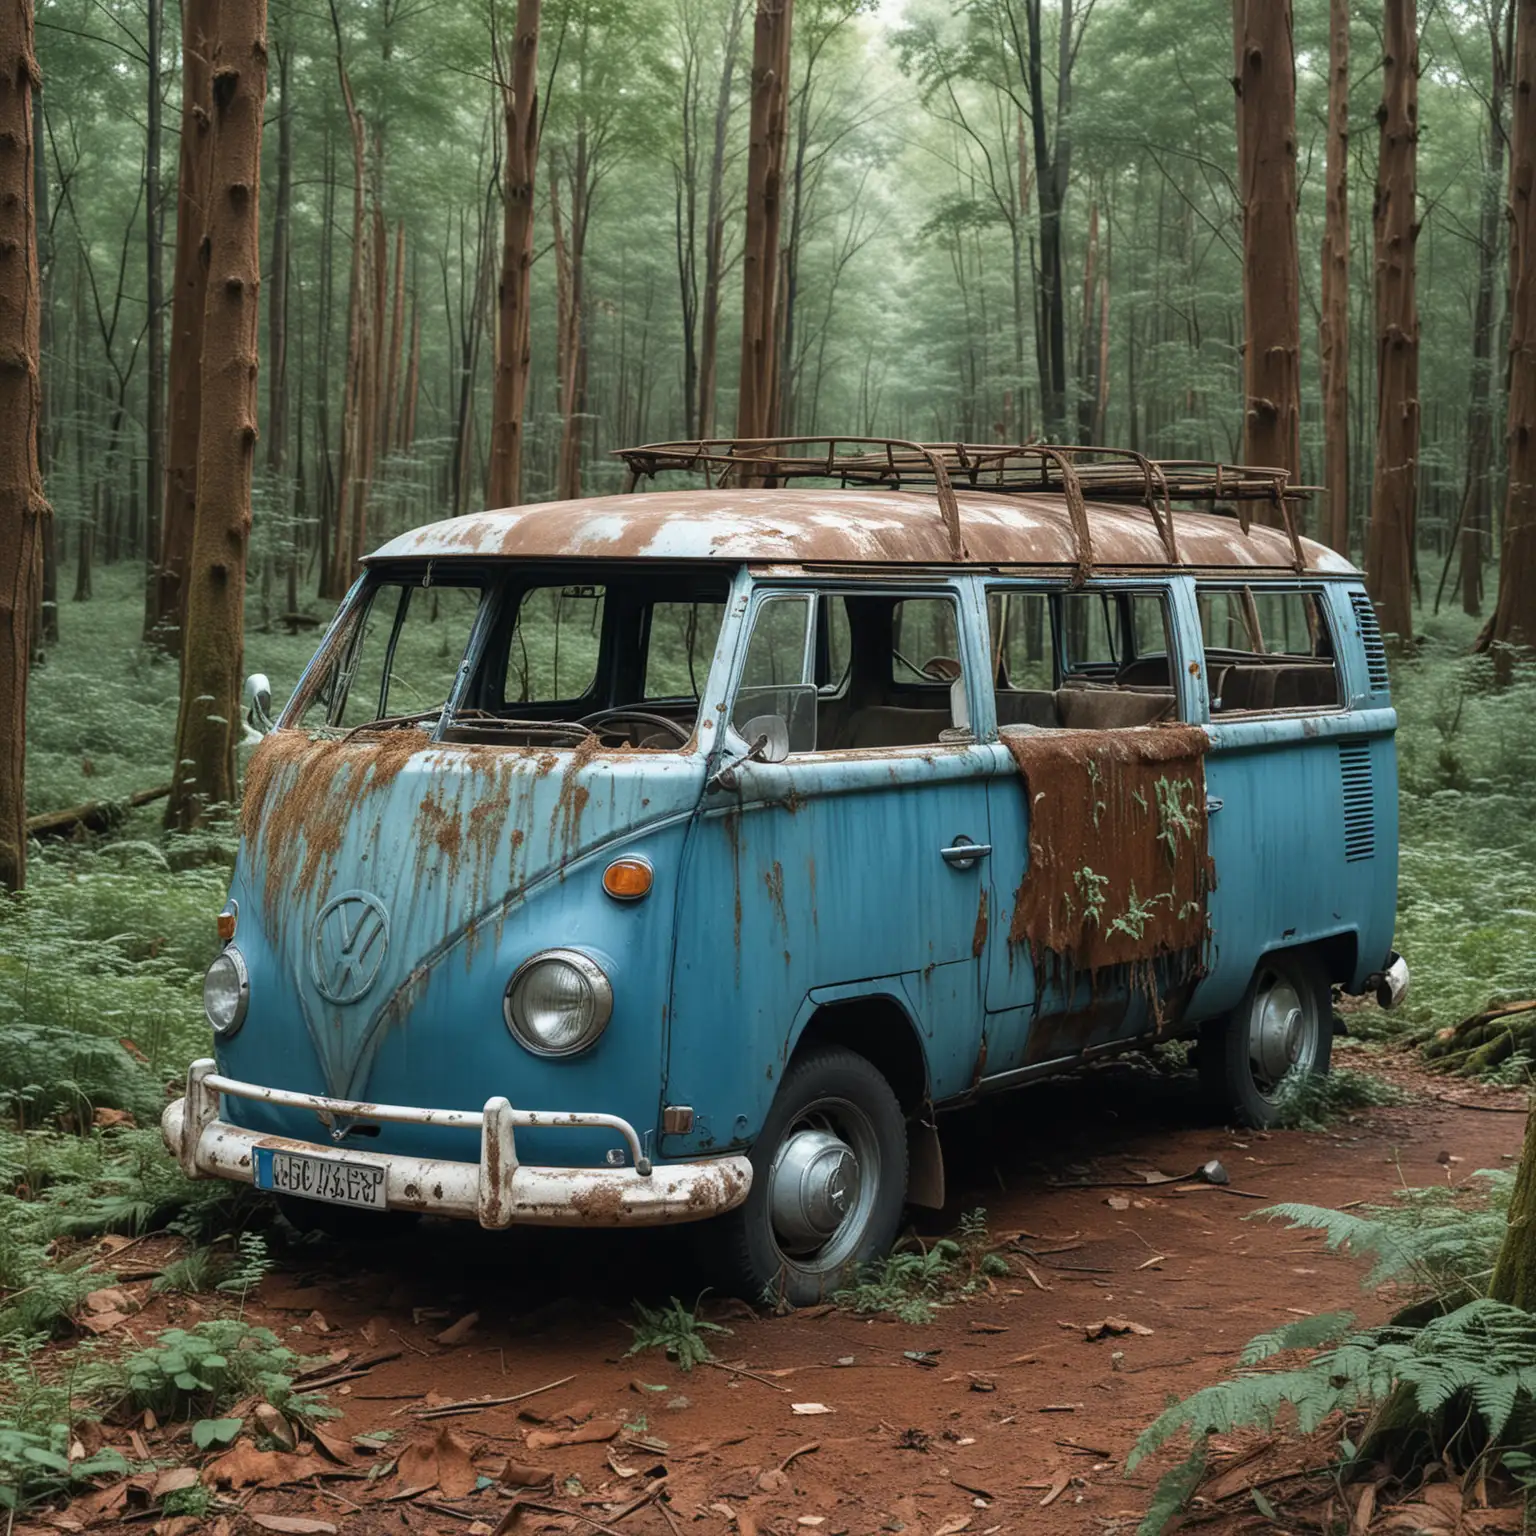 Abandoned-1966-Volkswagen-Transporter-T1-in-Forest-Clearing-with-Skeleton